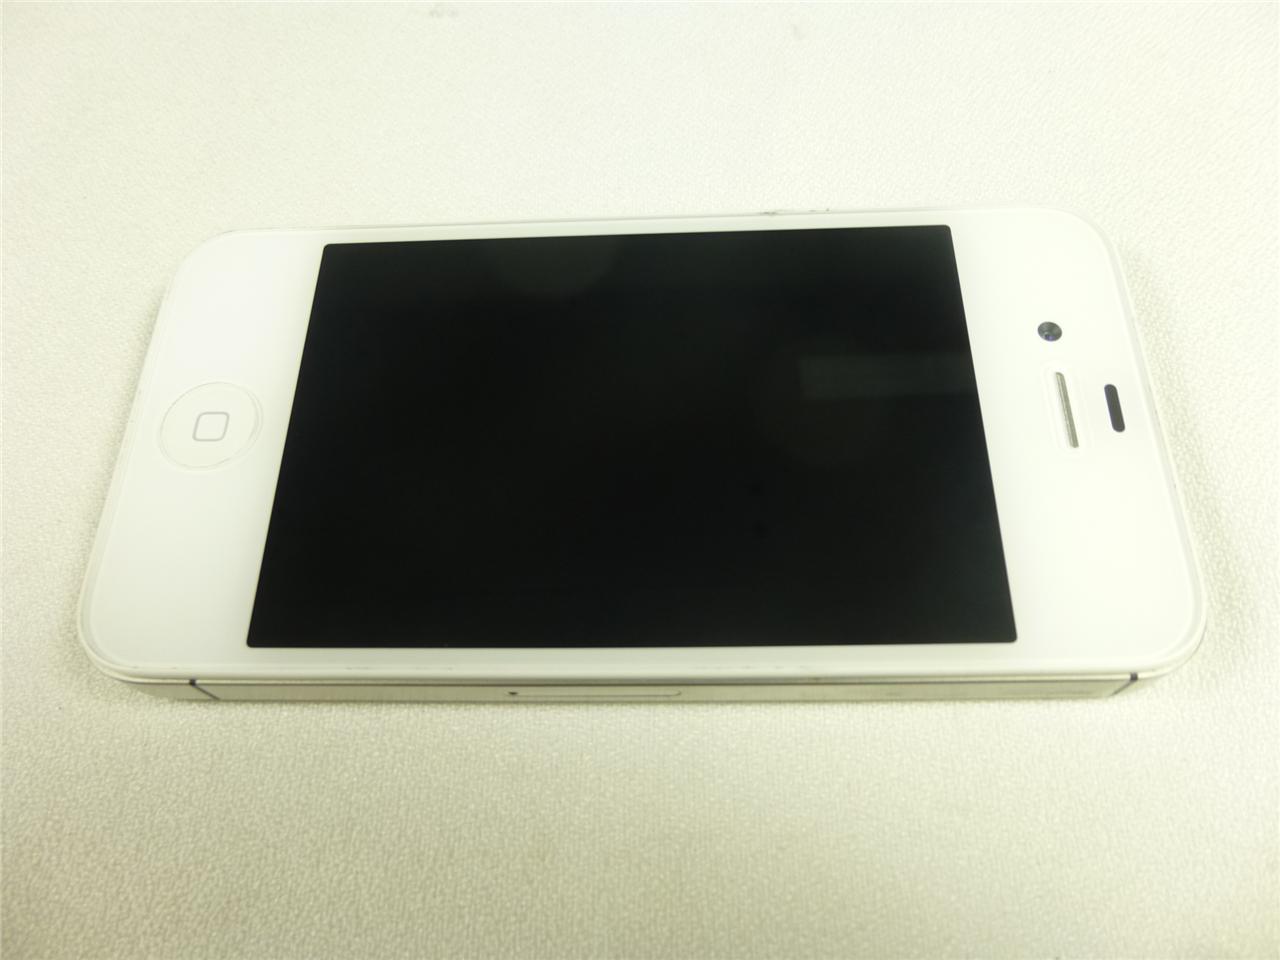 ... USED** Sprint Apple iPhone 4S 8GB - White - CLEAN ESN - HANDSET ONLY